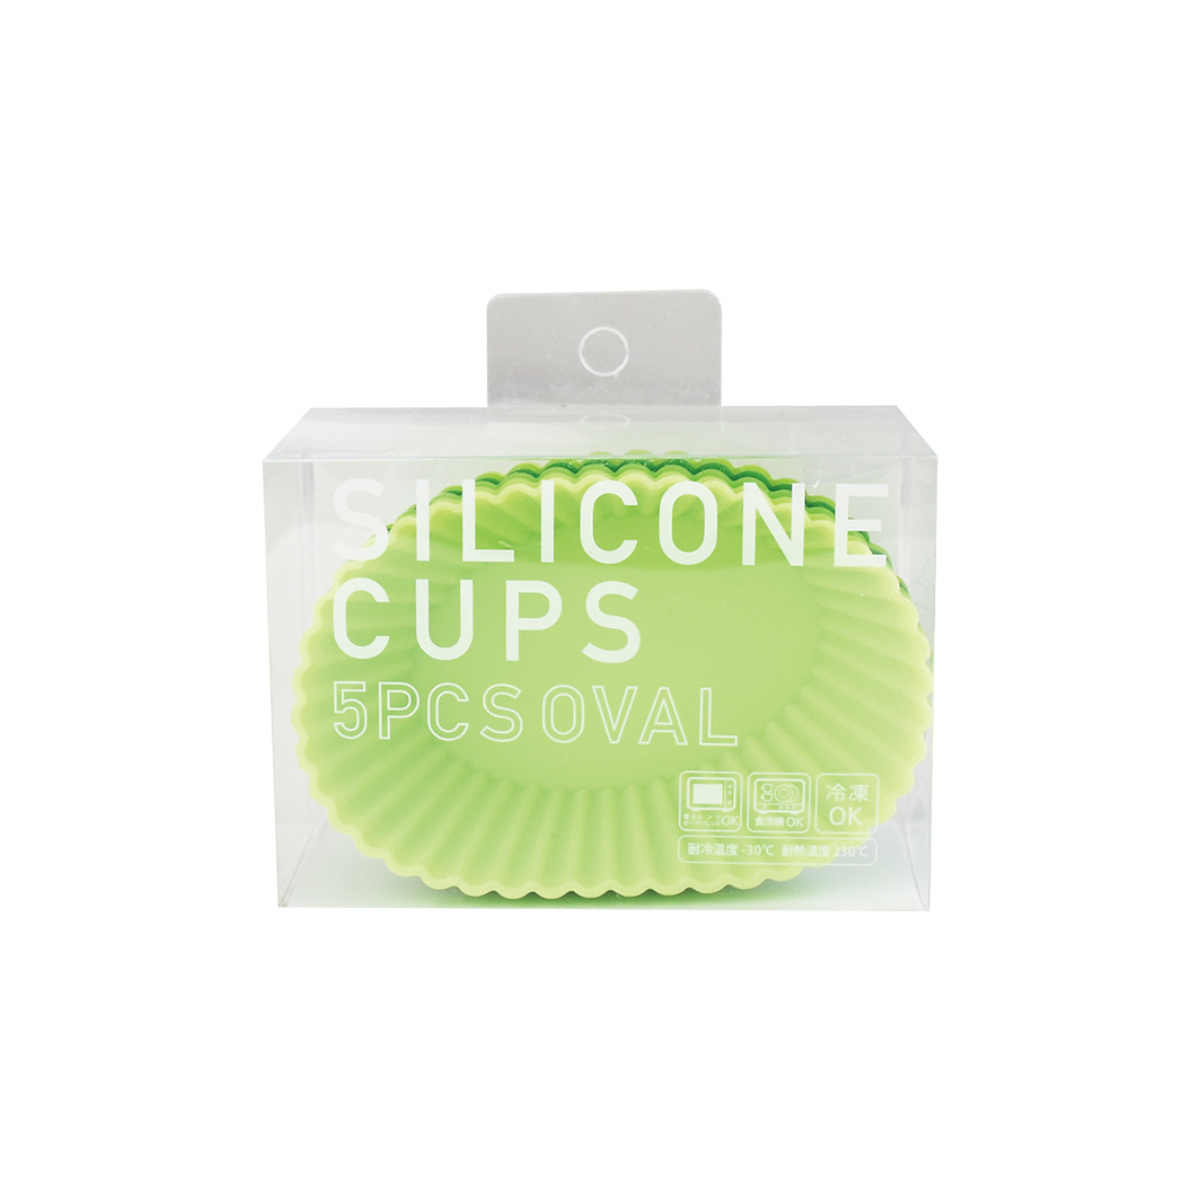  side dish cup si Ricoh n cup oval 5 piece entering (.. present cup range correspondence dishwasher correspondence side dish inserting small amount . cup bulkhead . cup 5 piece )